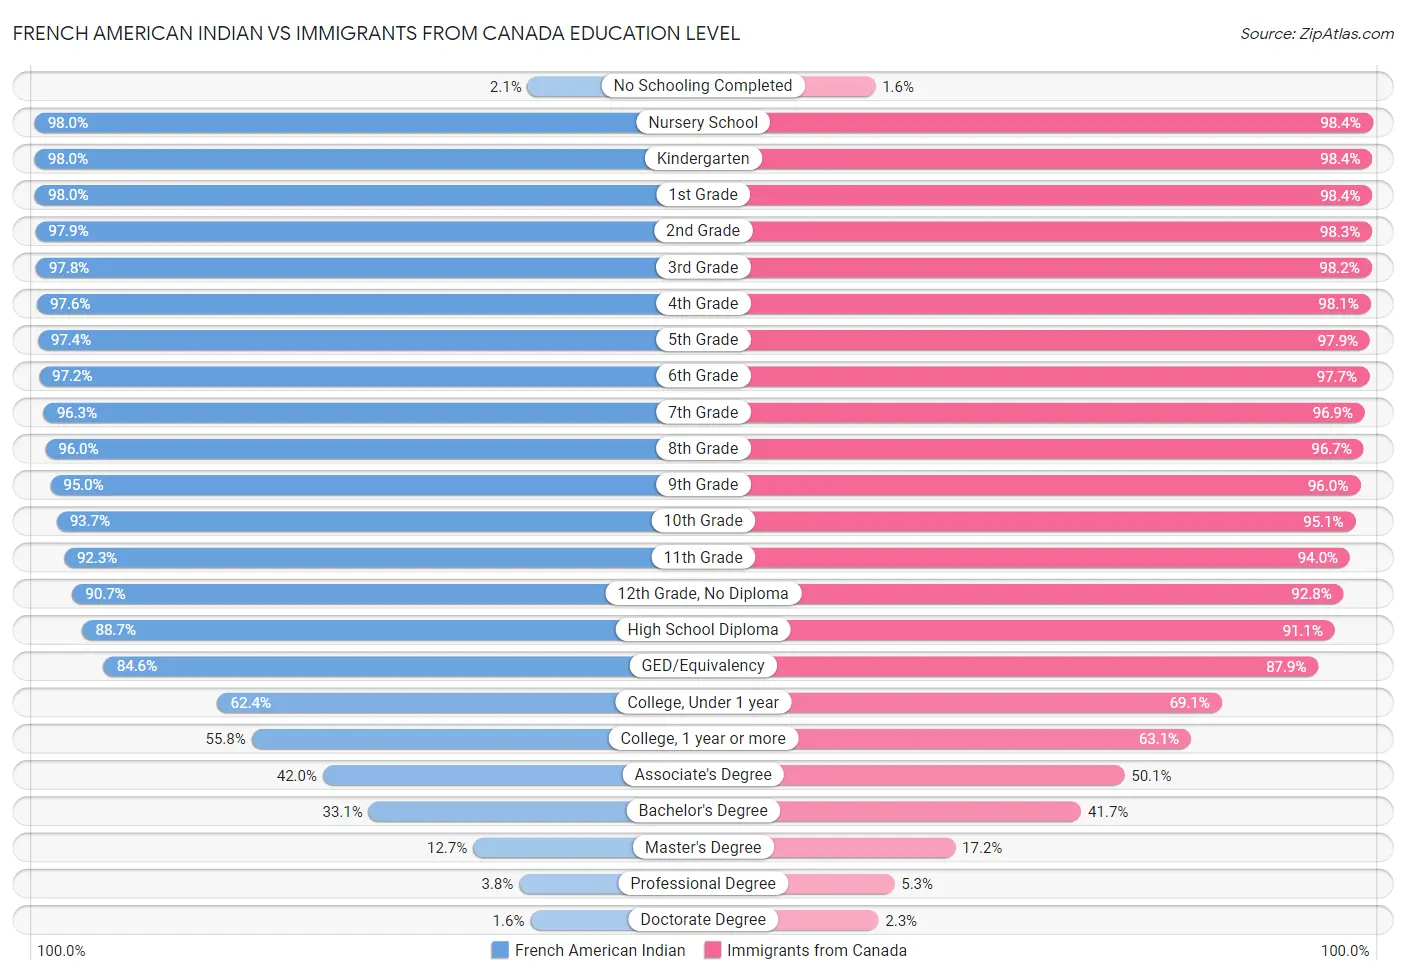 French American Indian vs Immigrants from Canada Education Level